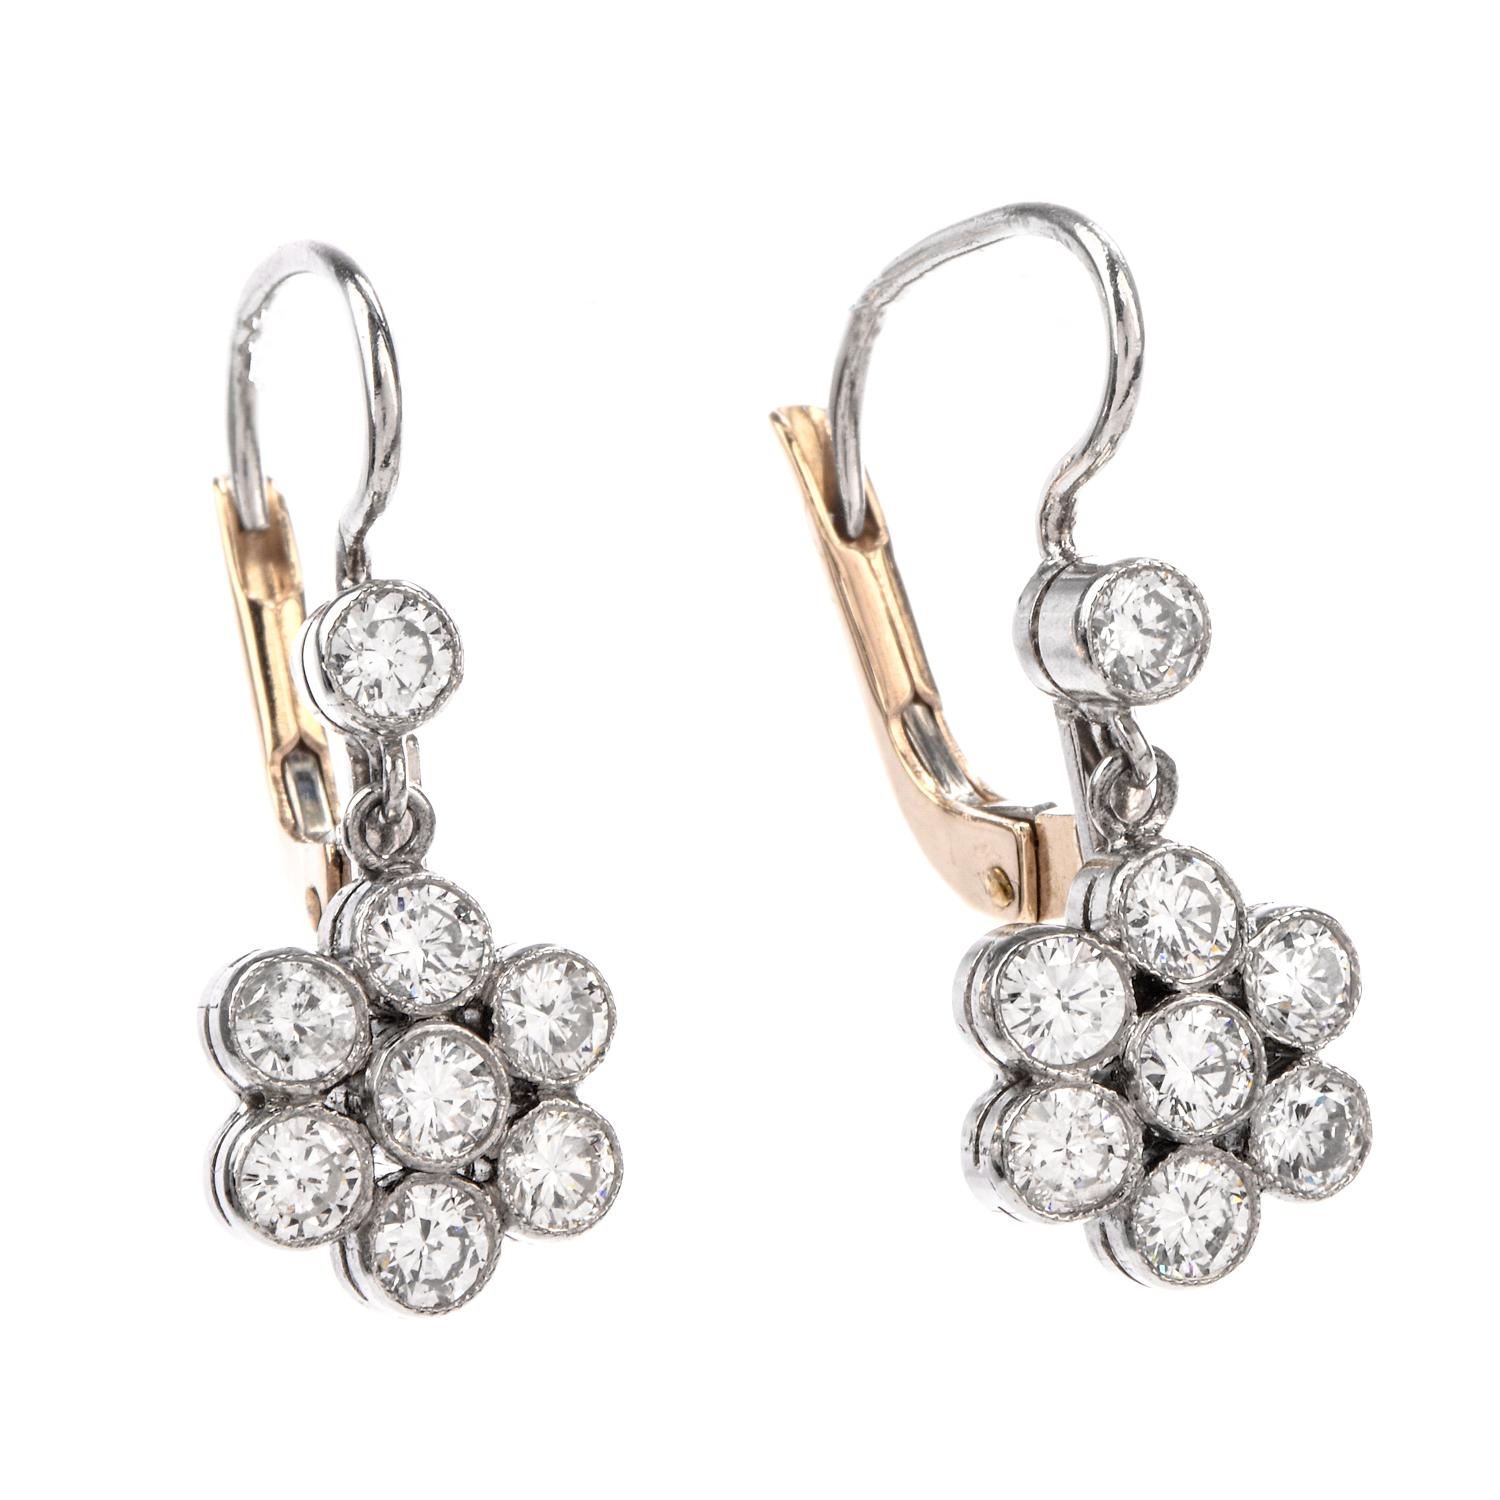 These Diamond Earring were inspired by a Dangling Floral motif and  crafted in Platinum and 18k yellow gold for backing.

A 7 diamond bezel set cluster is suspended from a single diamond creating movement as these are worn. Diamonds weigh approx.